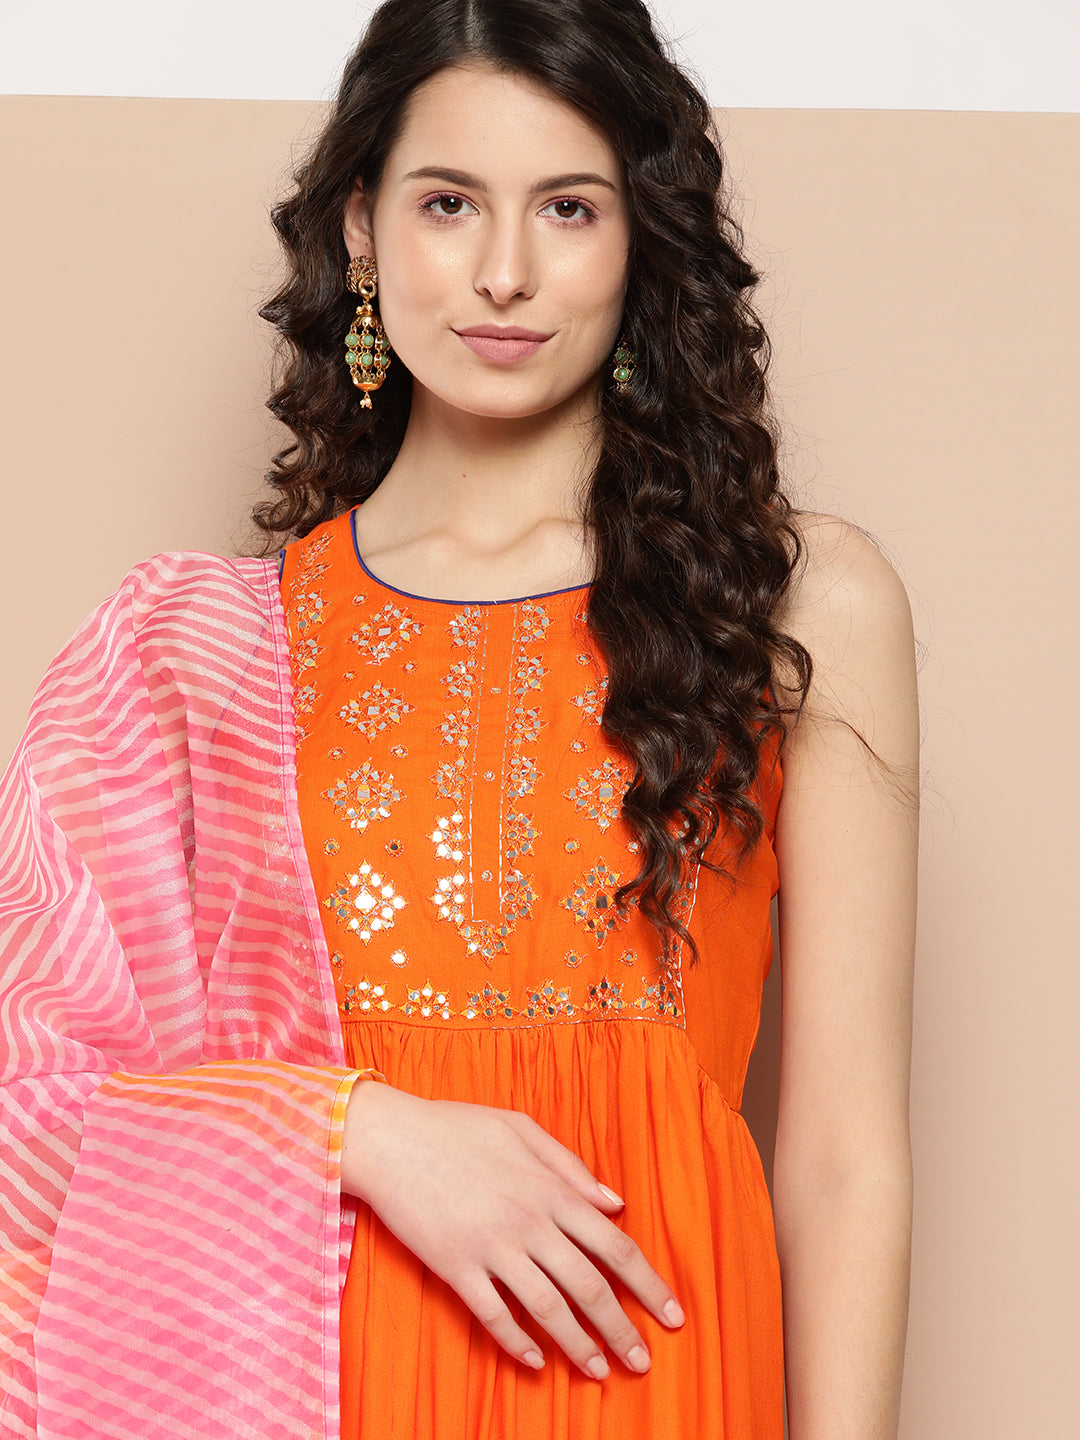 PINK & YELLOW - PARTY WEAR GOWN WITH NECK LINE HAND WORK & DUPATTA